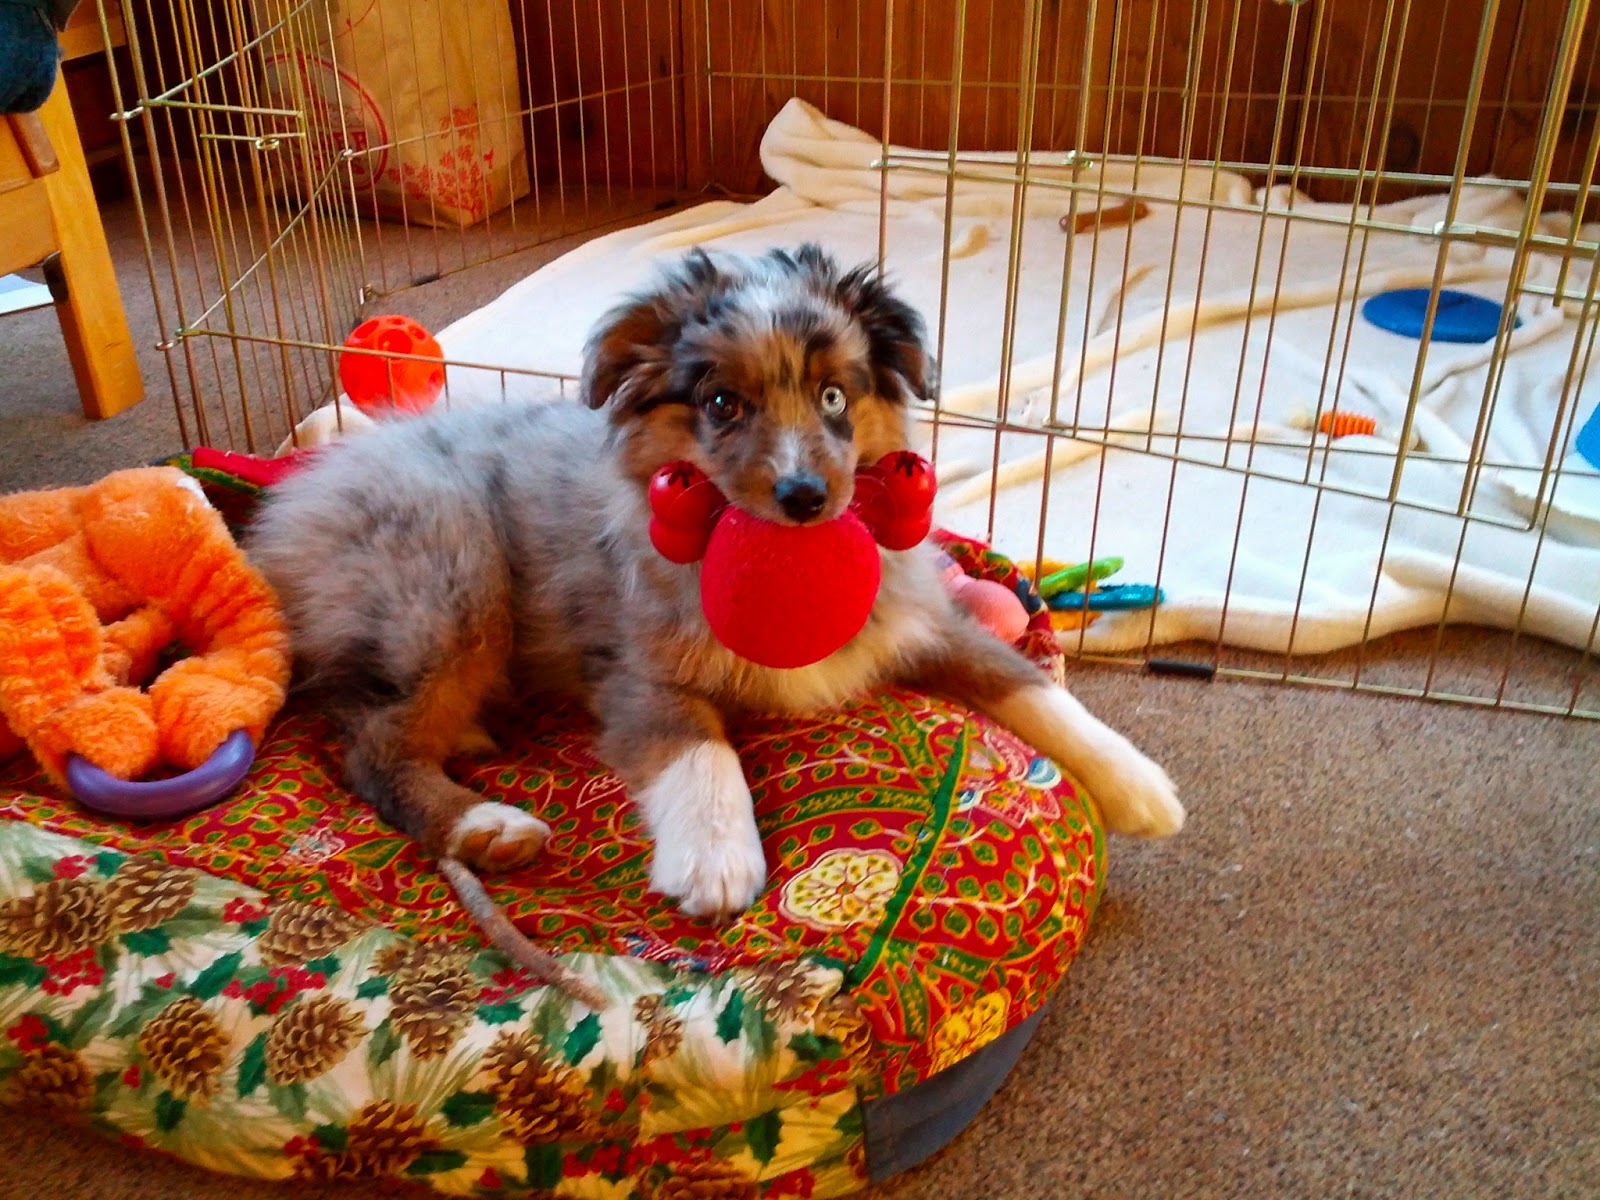 Raising a Mini Aussie: BEST Toys for mini and toy aussie puppies!